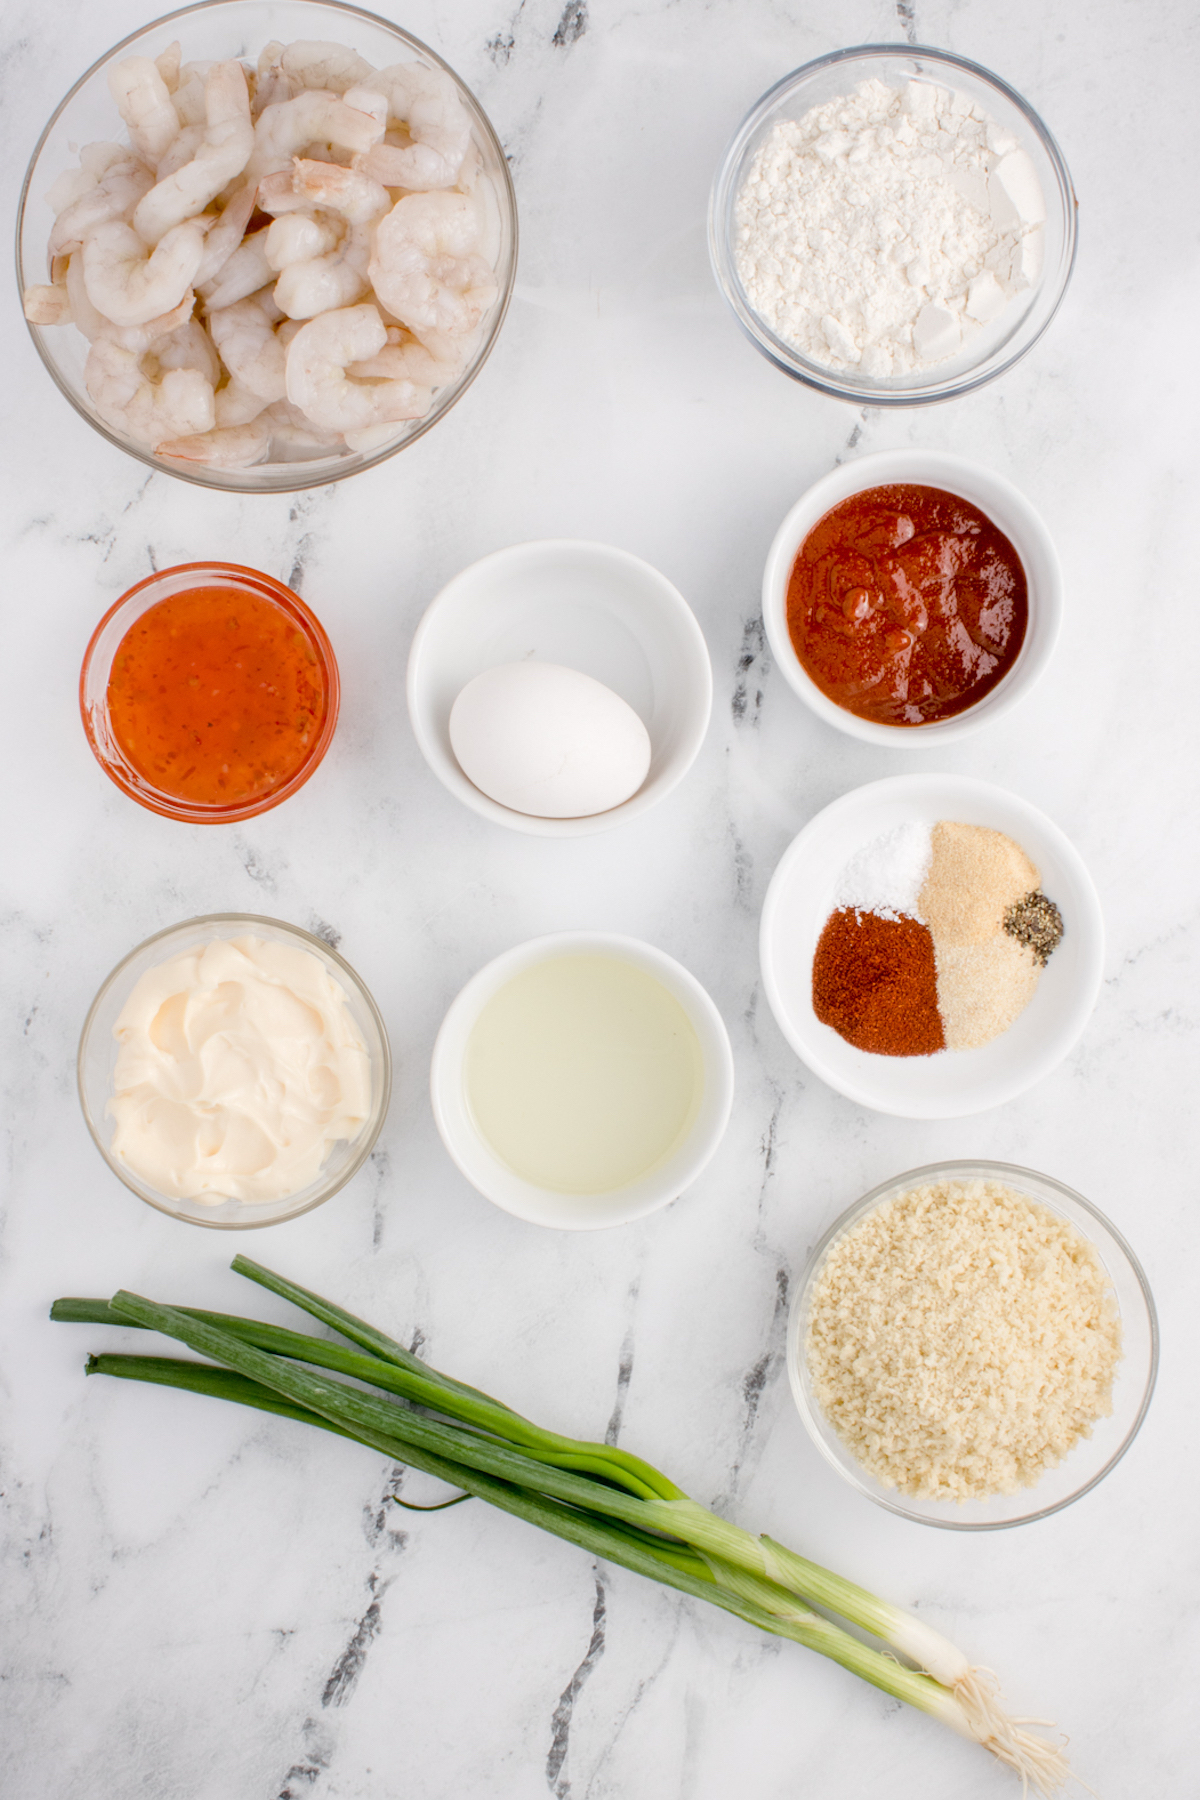 All the ingredients needed to make air fried bang bang shrimp laid out in small prep bowls.